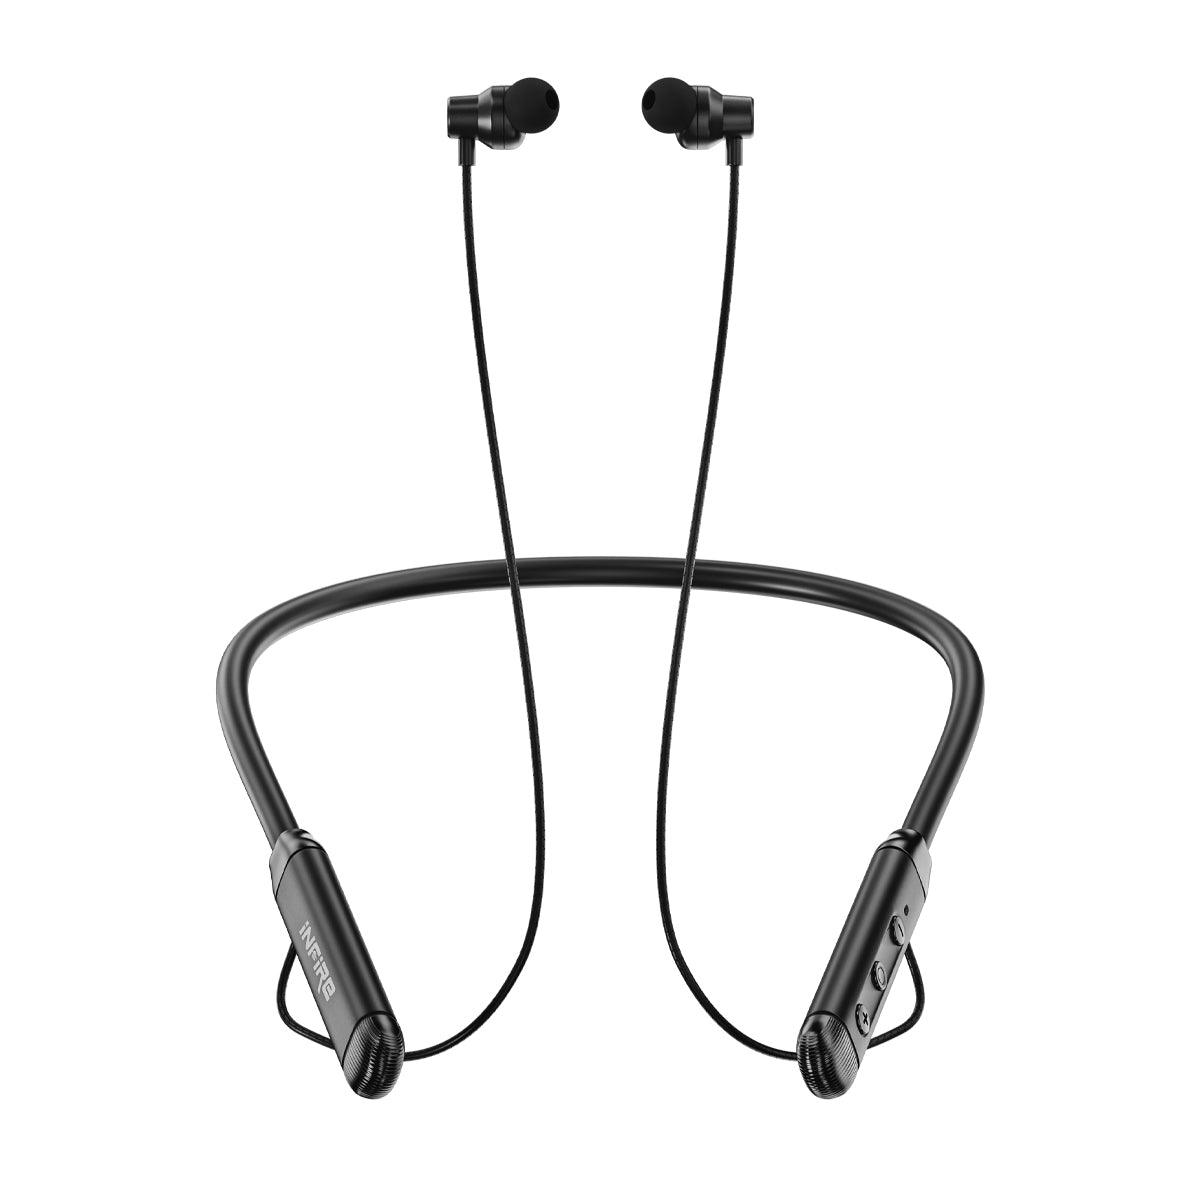 iNFiRe FireBand 101 upto 50 Hours Playback Time , IPX5 with Fire Charge Bluetooth NeckBand - iNFiRe